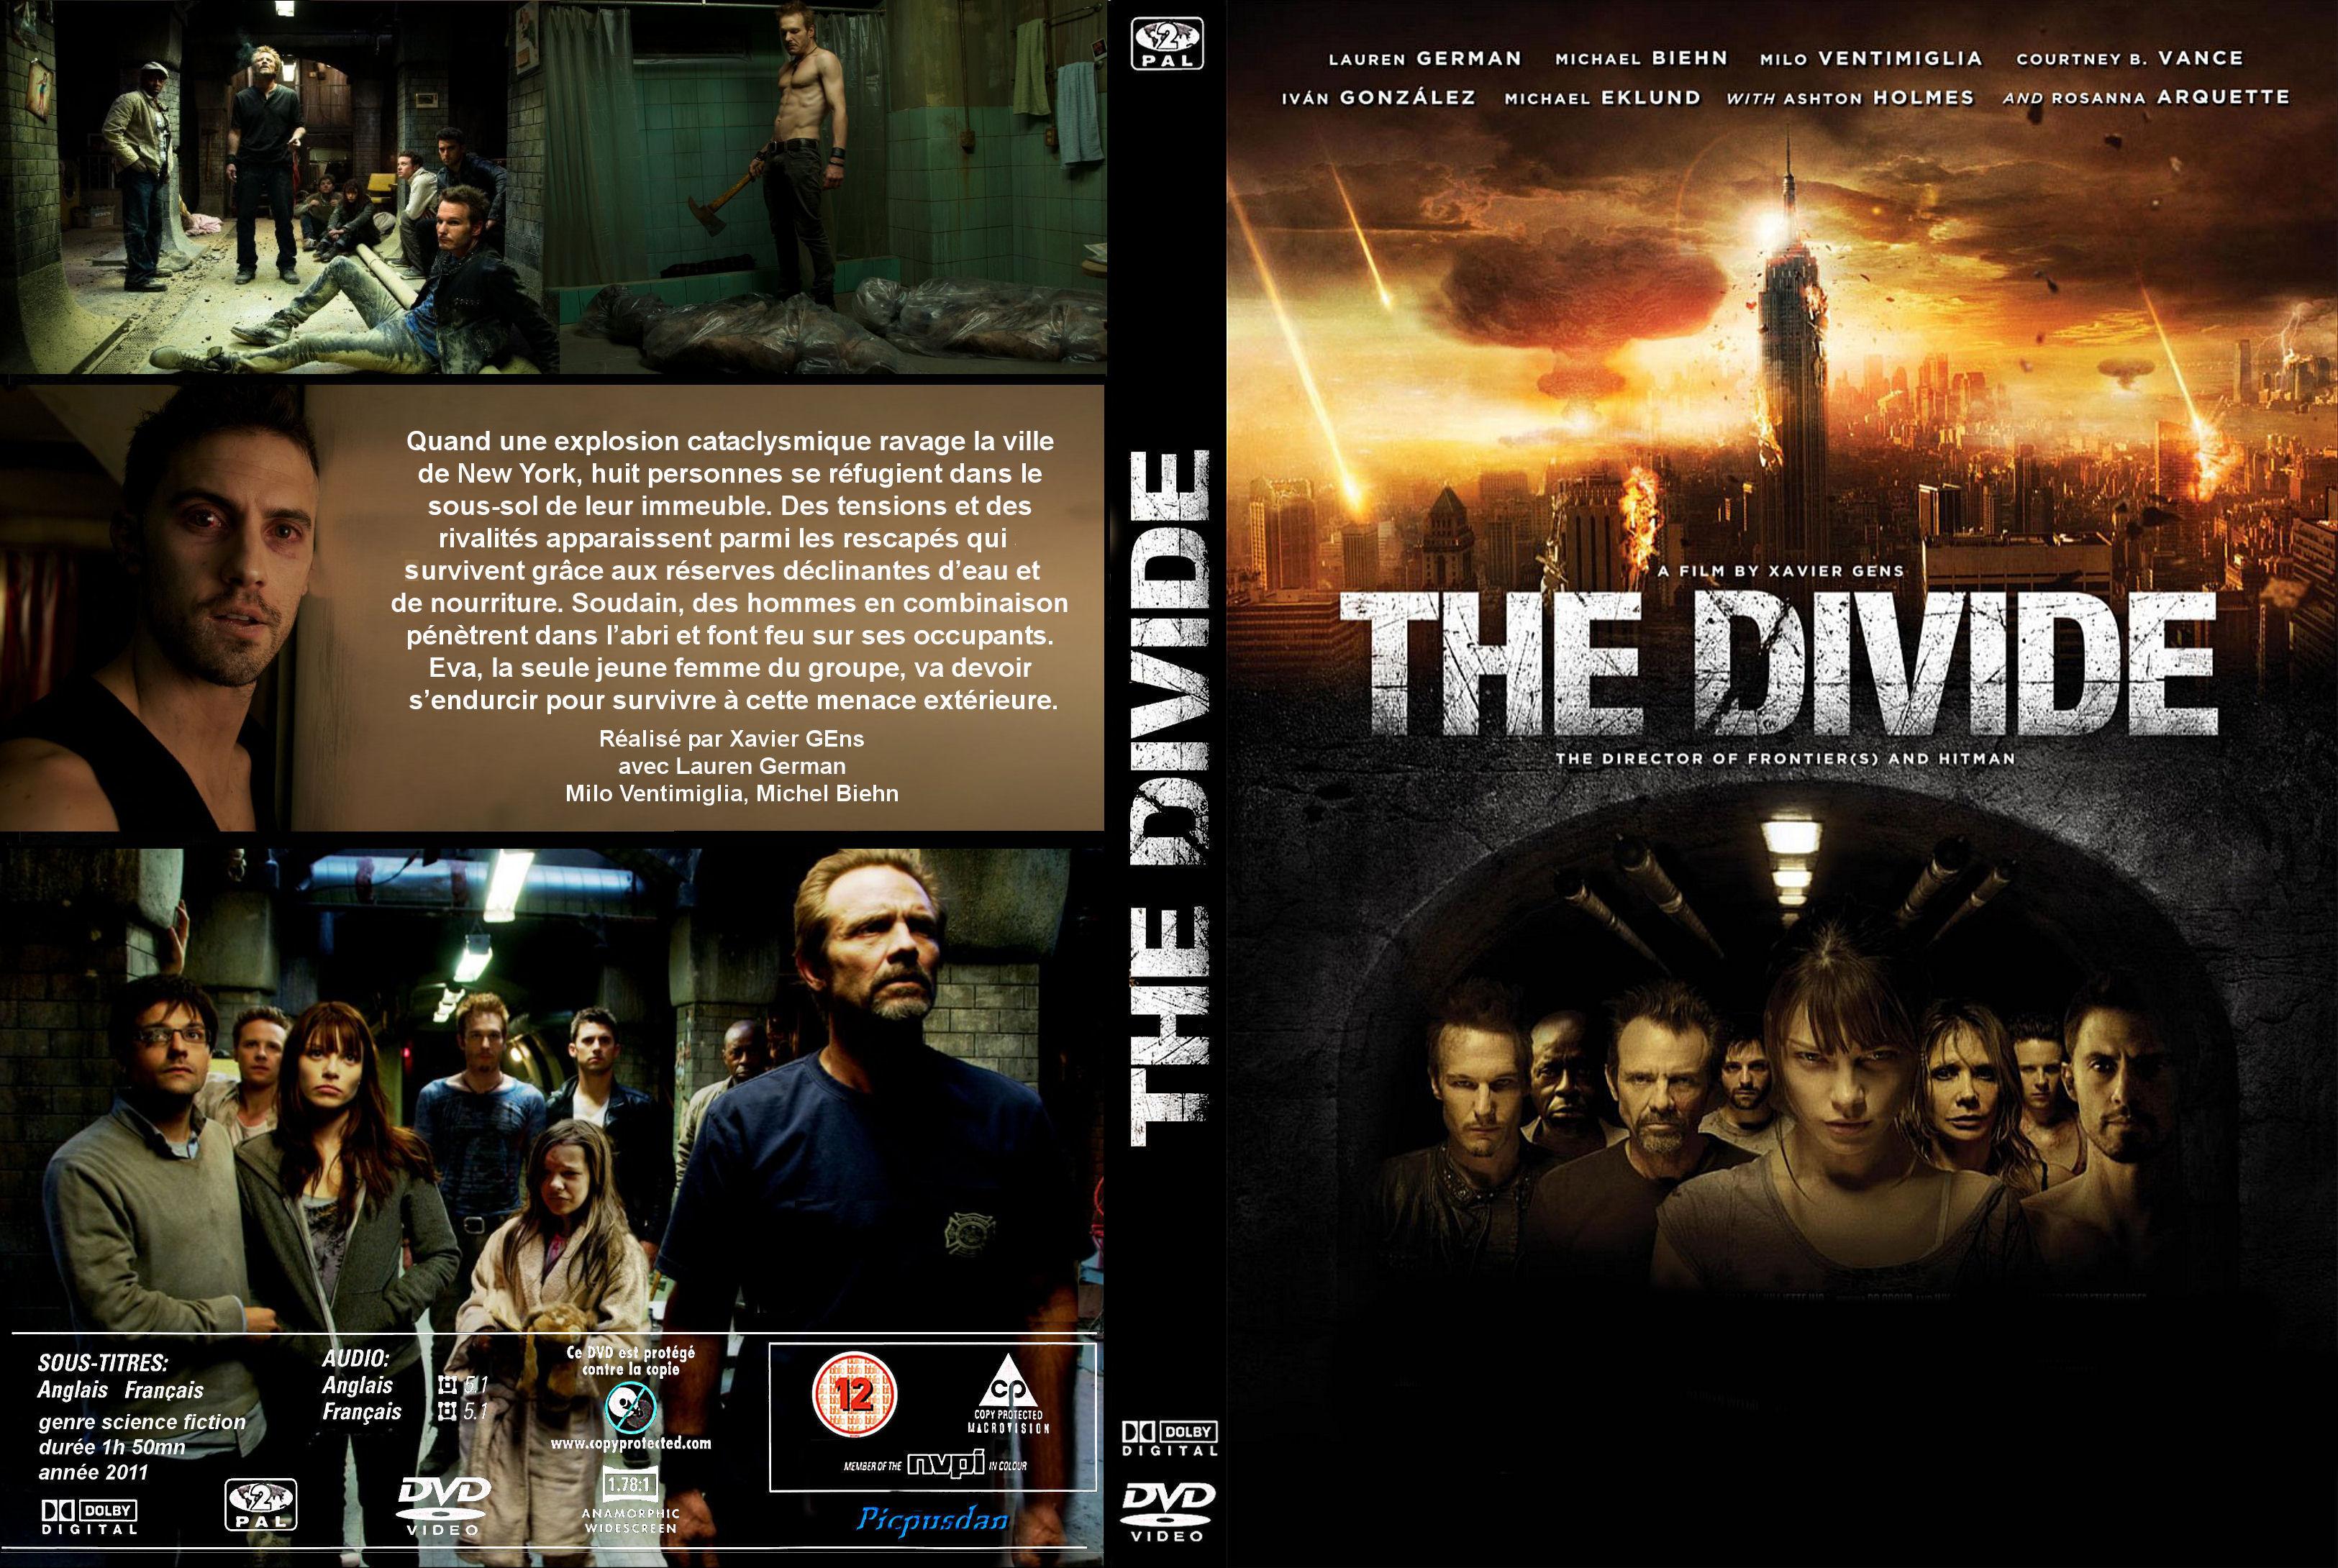 Jaquette DVD The Divide custom